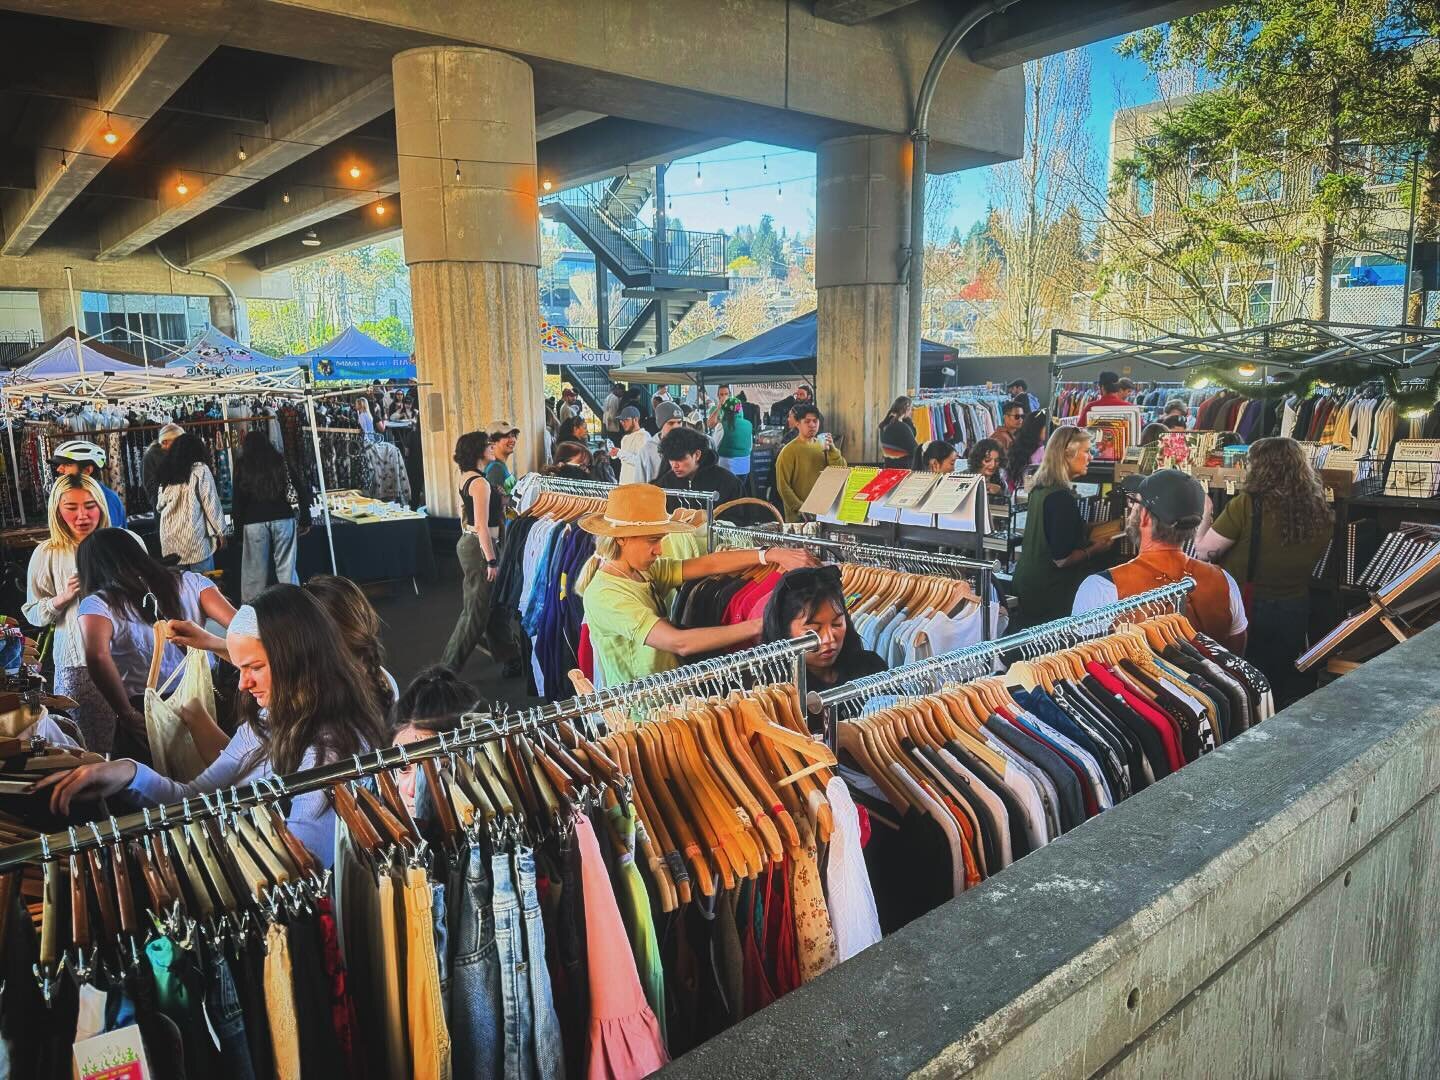 Seattle&rsquo;s favorite Street Market is growing this Spring with our new Fremont Bridge Bazaar that adds 50 spaces underneath the Fremont Bridge all summer long starting as low as $50 a booth! Come shop Seattle&rsquo;s largest market rain or shine 